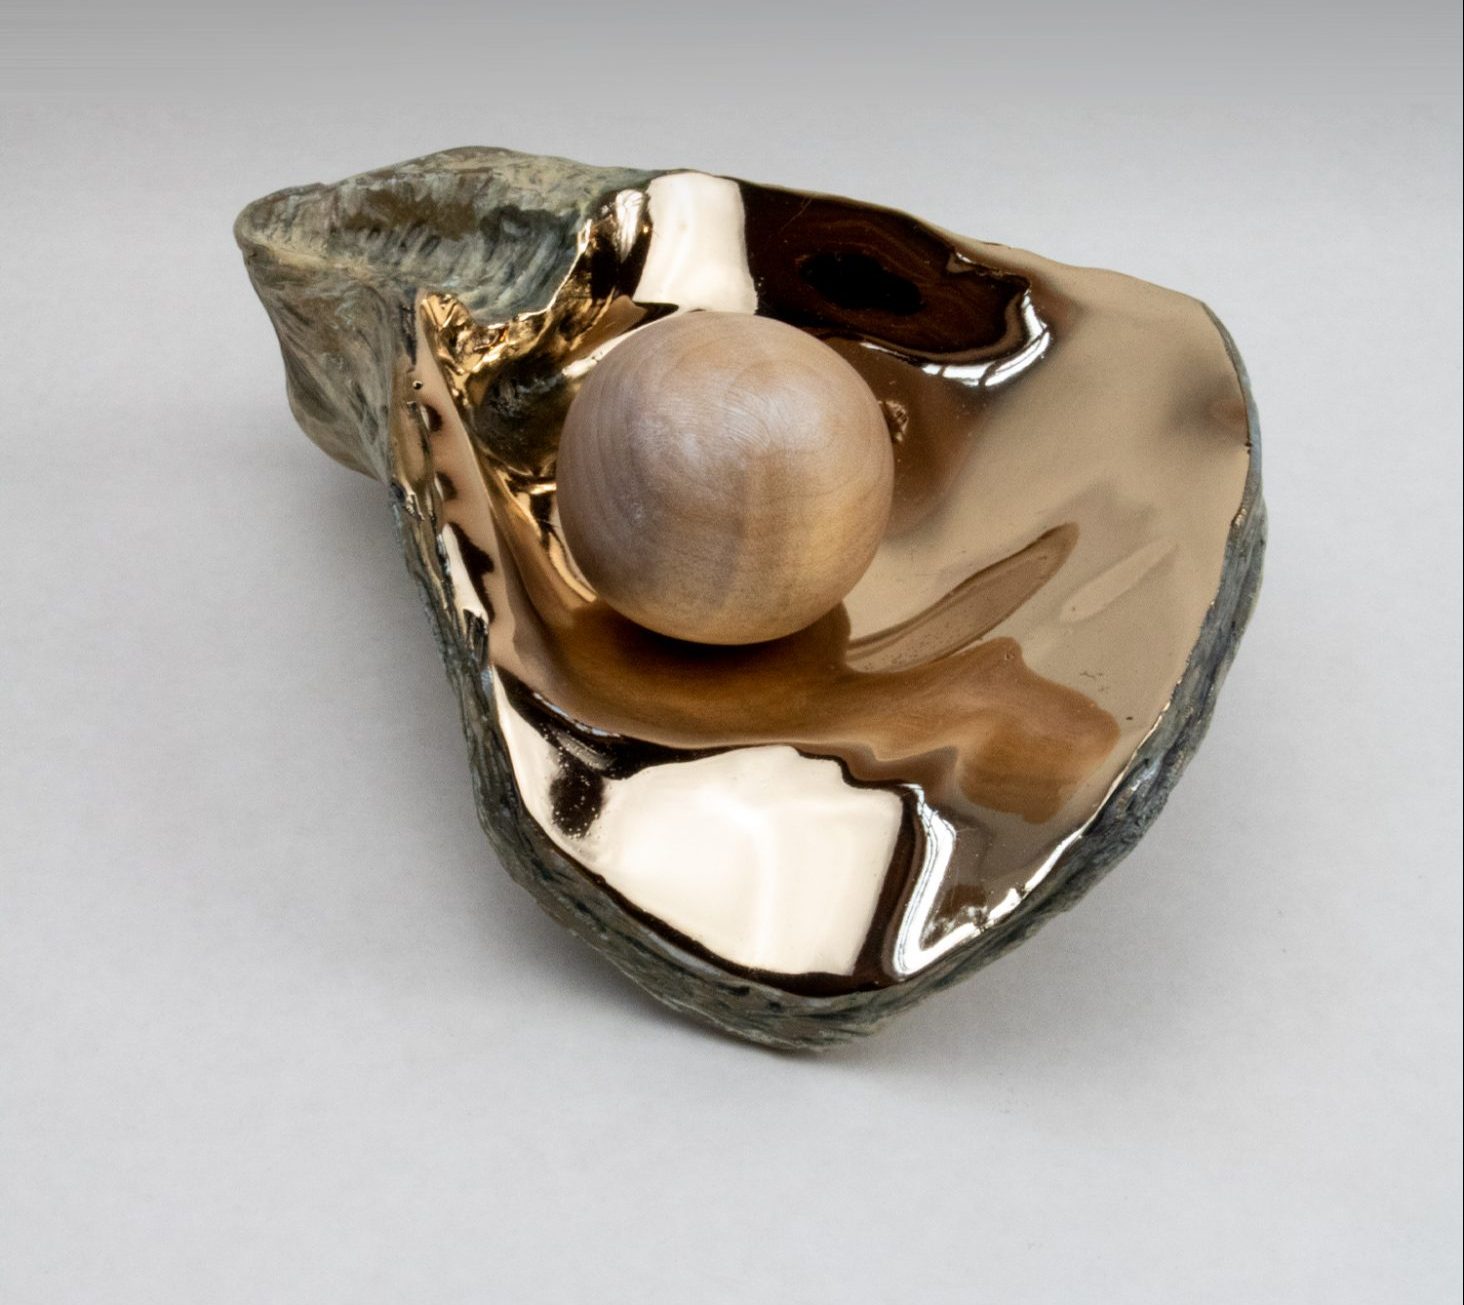 Andrew Vallees Show work  Bronze Oyster e